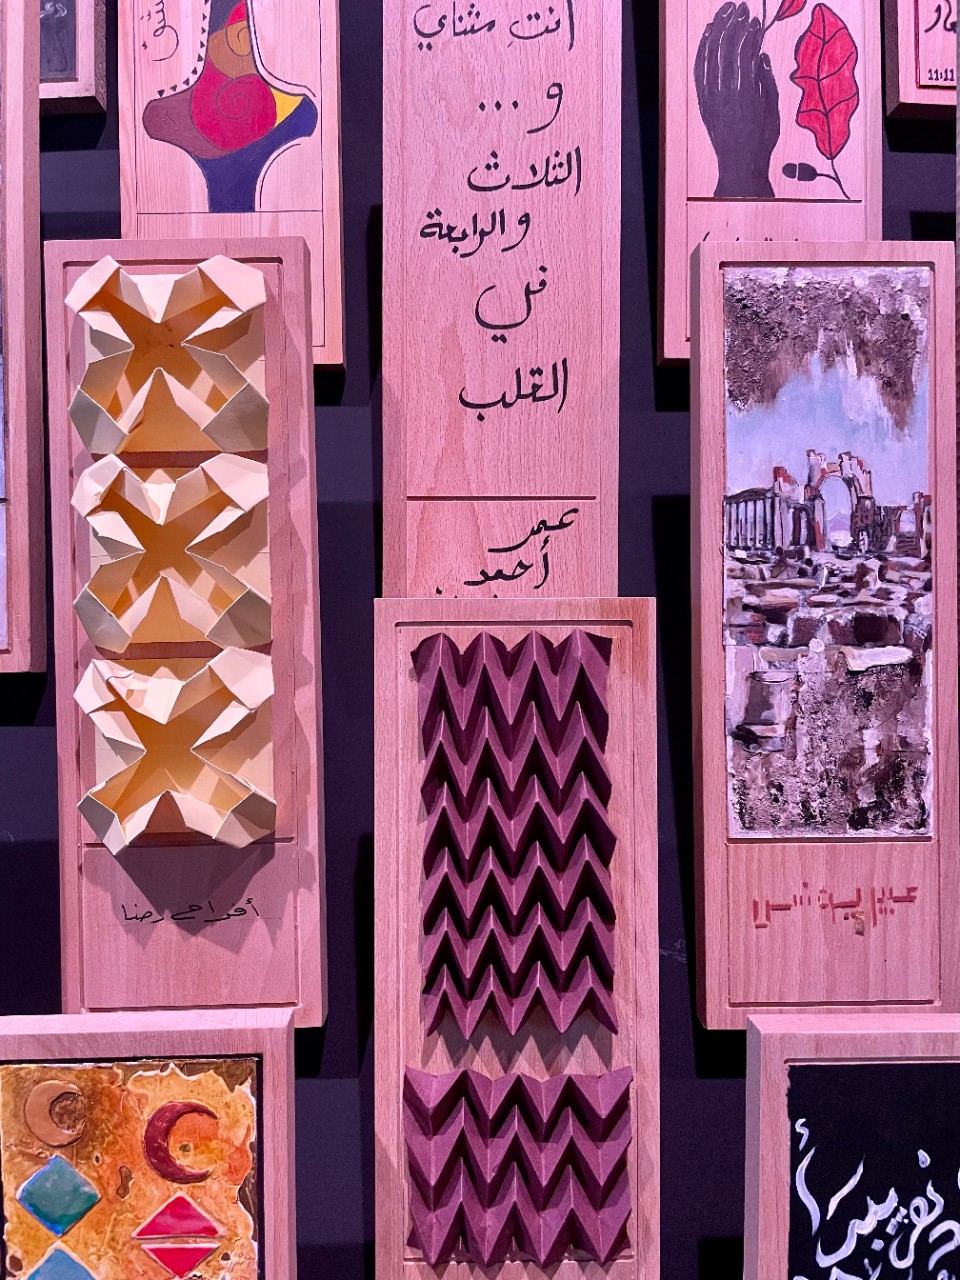 Diverse wooden slabs painted by Syrians who had left home being shown in the Syrian Pavilion at Expo 2020.